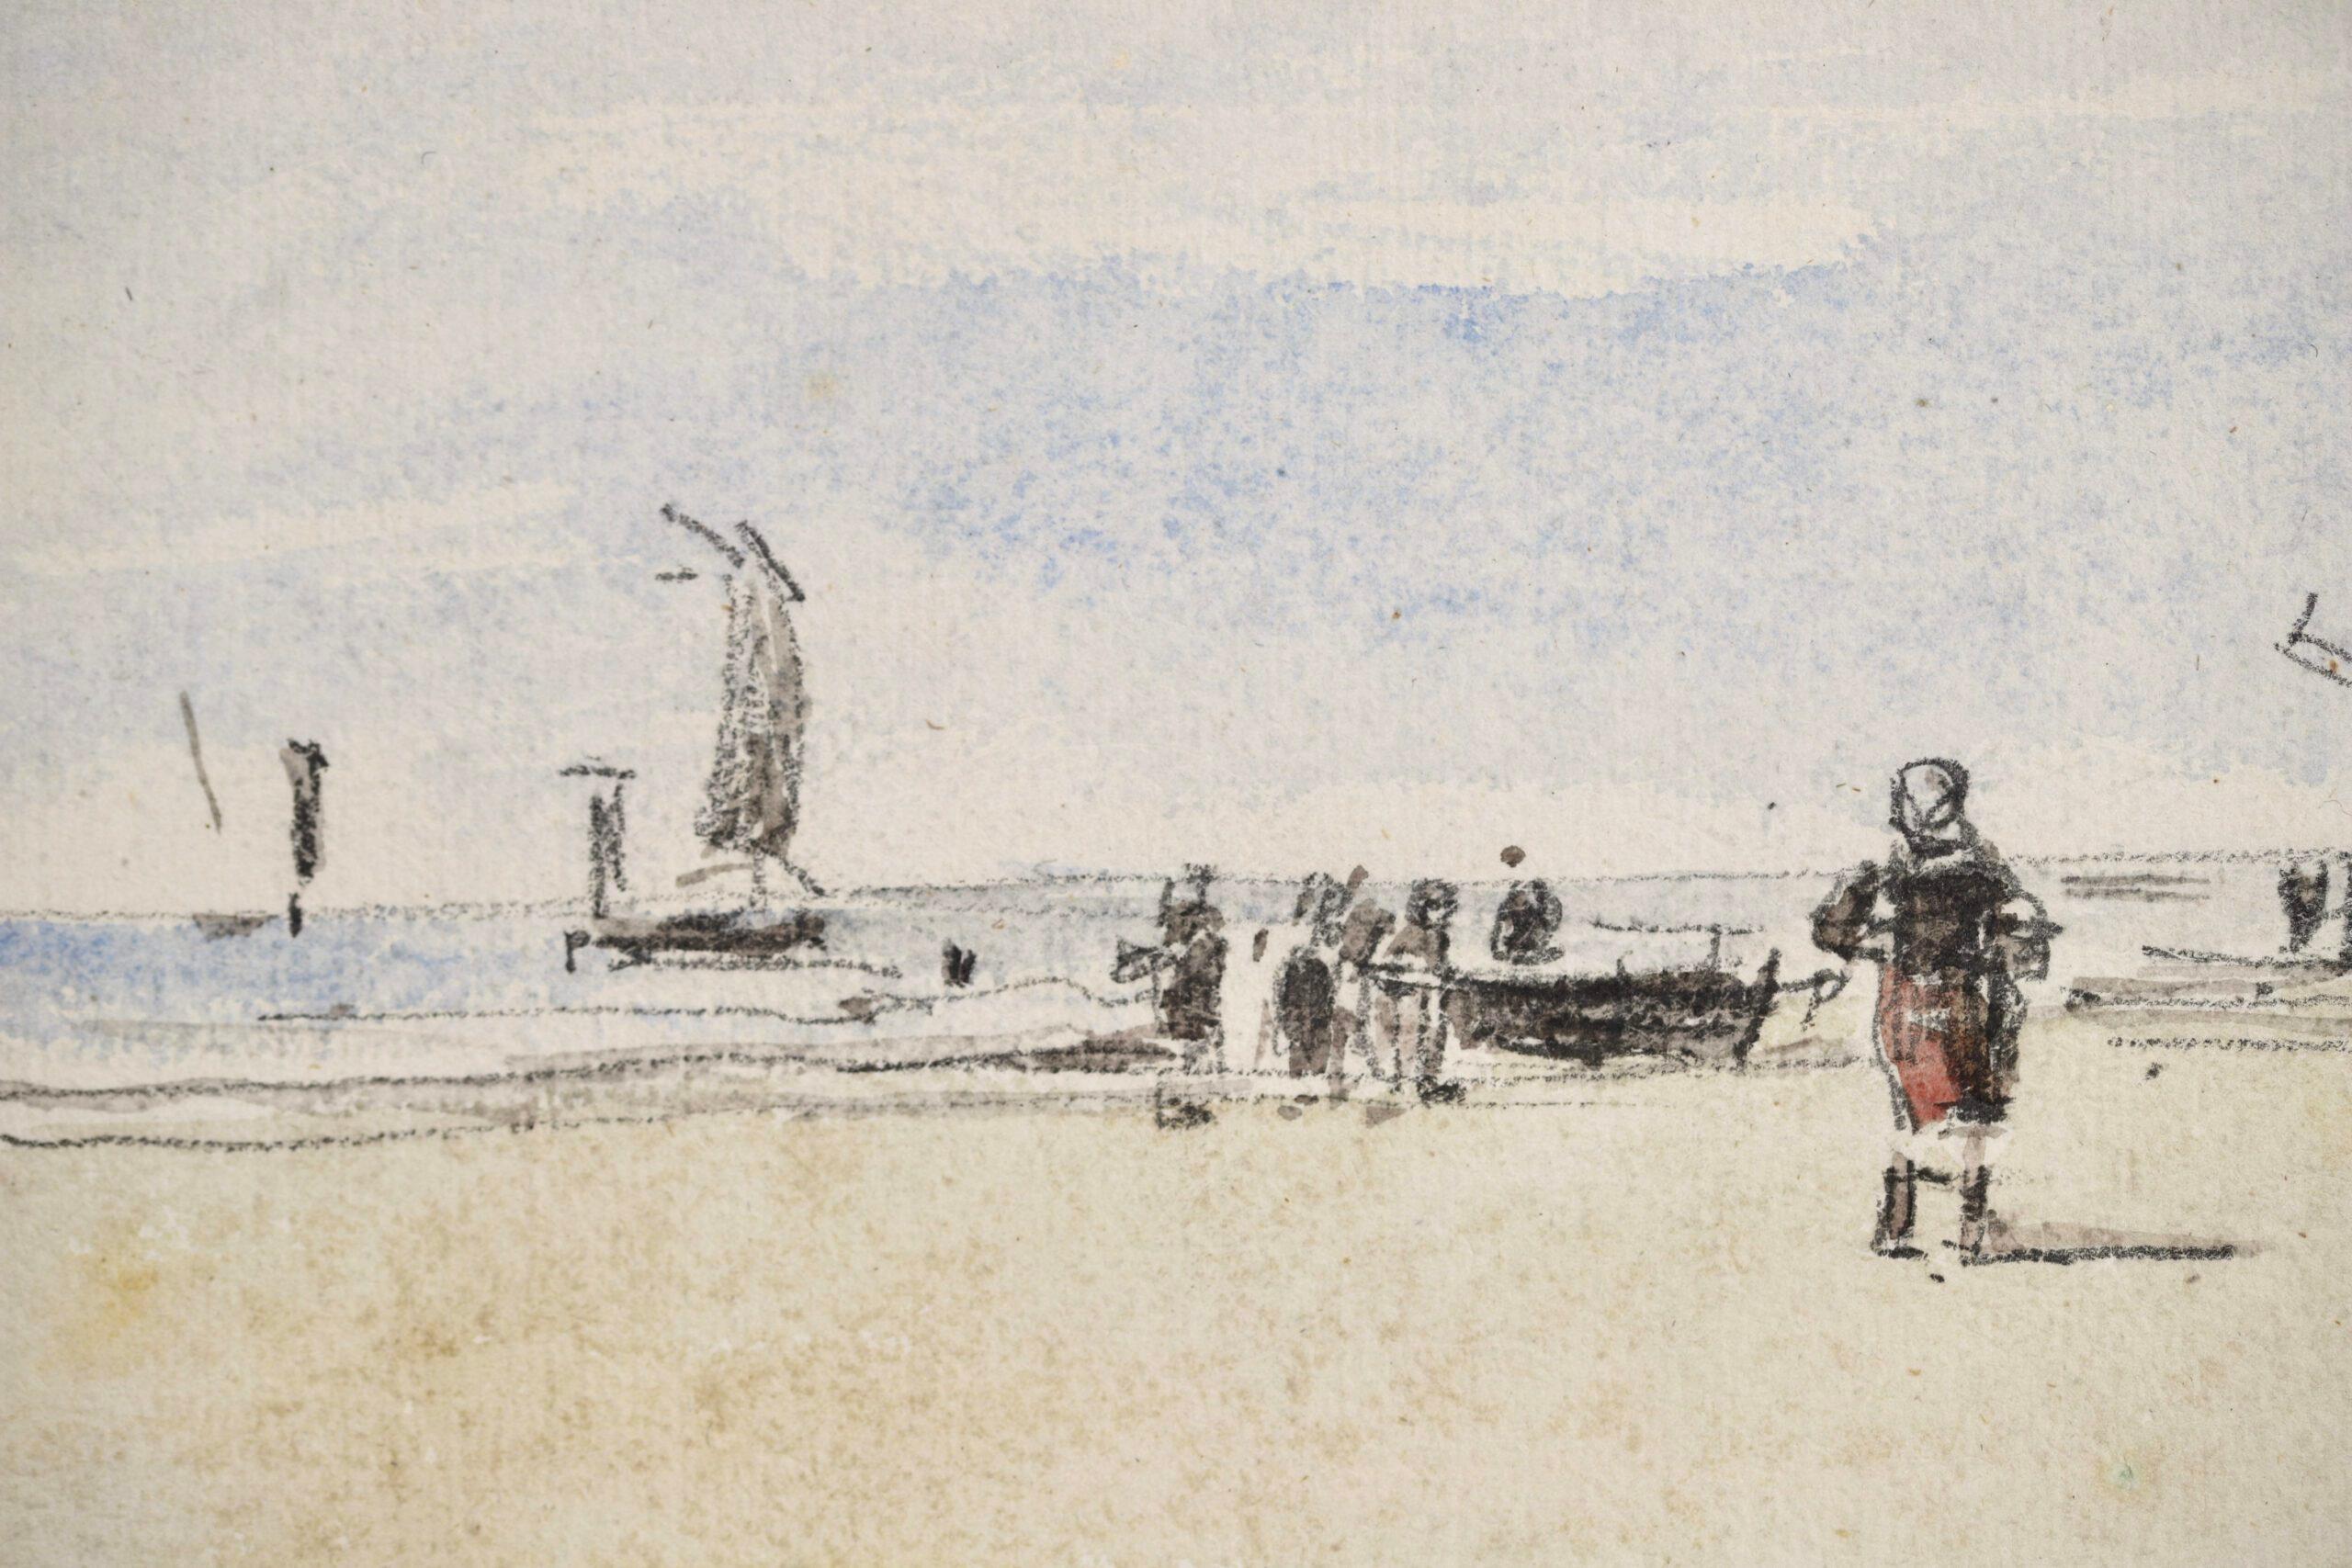 Signed watercolour on paper landscape circa 1870 by French impressionist painter Eugene Boudin.  The work depicts figures on a golden-sanded beach at low tide with sailing boats in the blue seawater.

Signature:
Signed twice with cachet lower